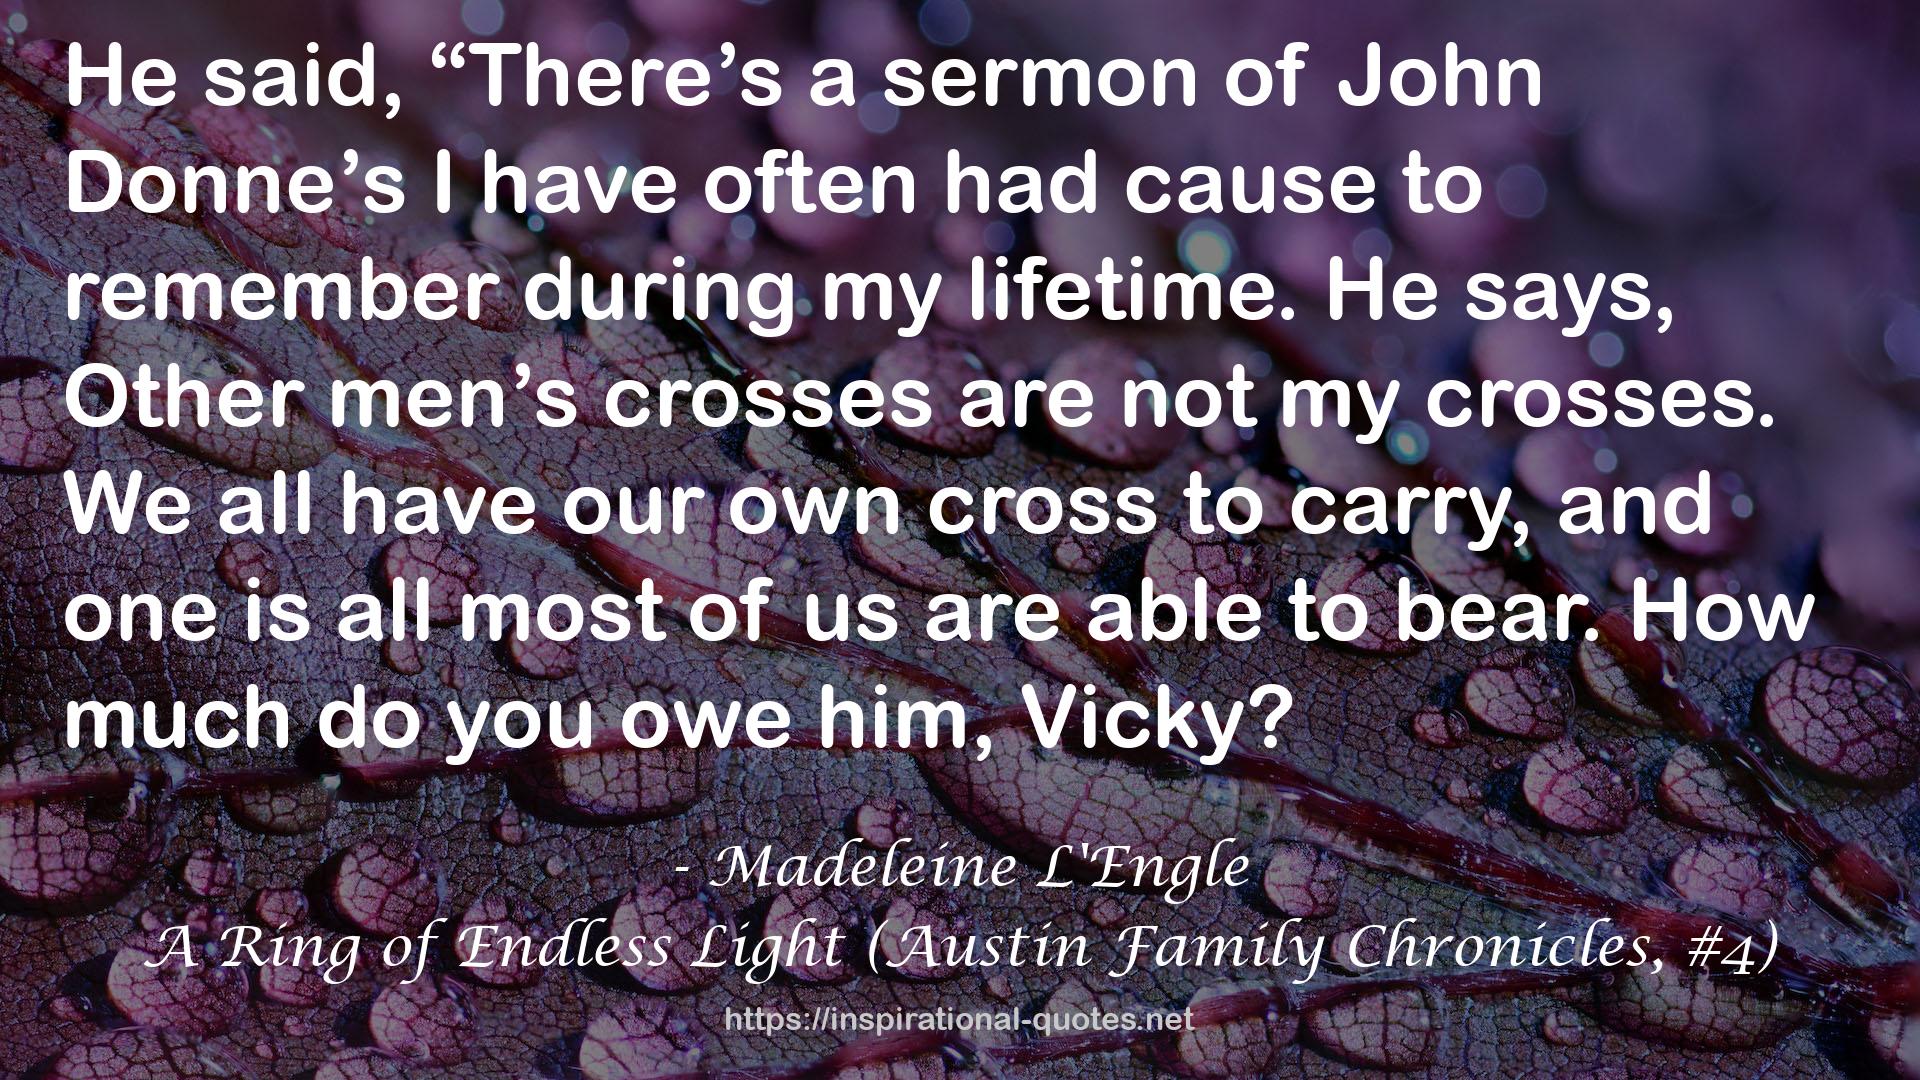 A Ring of Endless Light (Austin Family Chronicles, #4) QUOTES